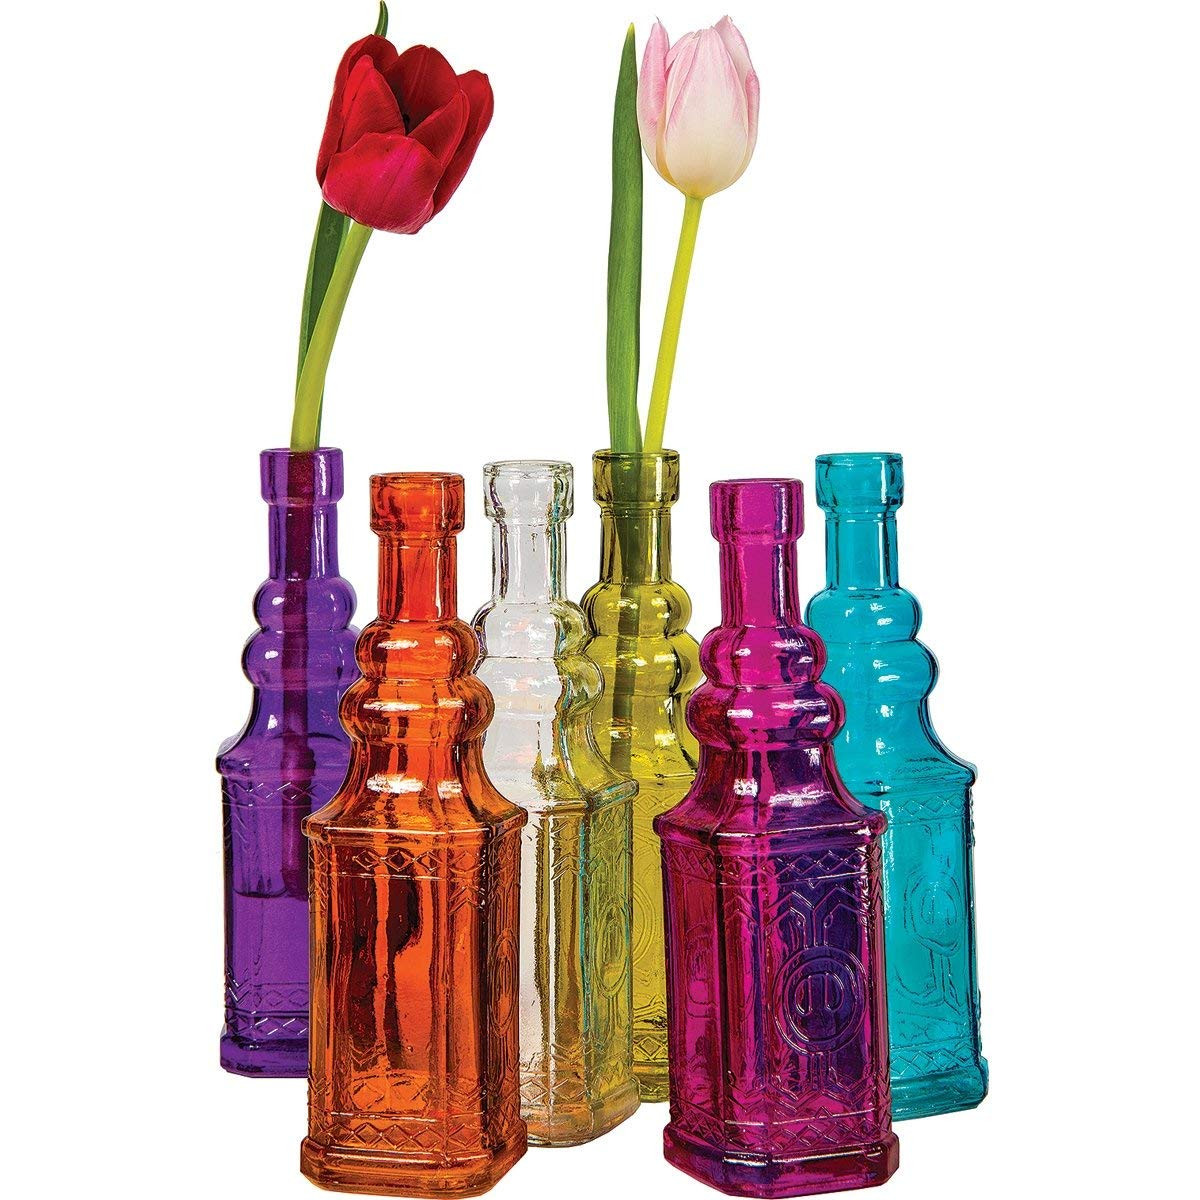 28 Spectacular Cheap Small Glass Bud Vases 2024 free download cheap small glass bud vases of durable modeling luna bazaar small vintage glass bottle set 7 inch intended for durable modeling luna bazaar small vintage glass bottle set 7 inch ella design